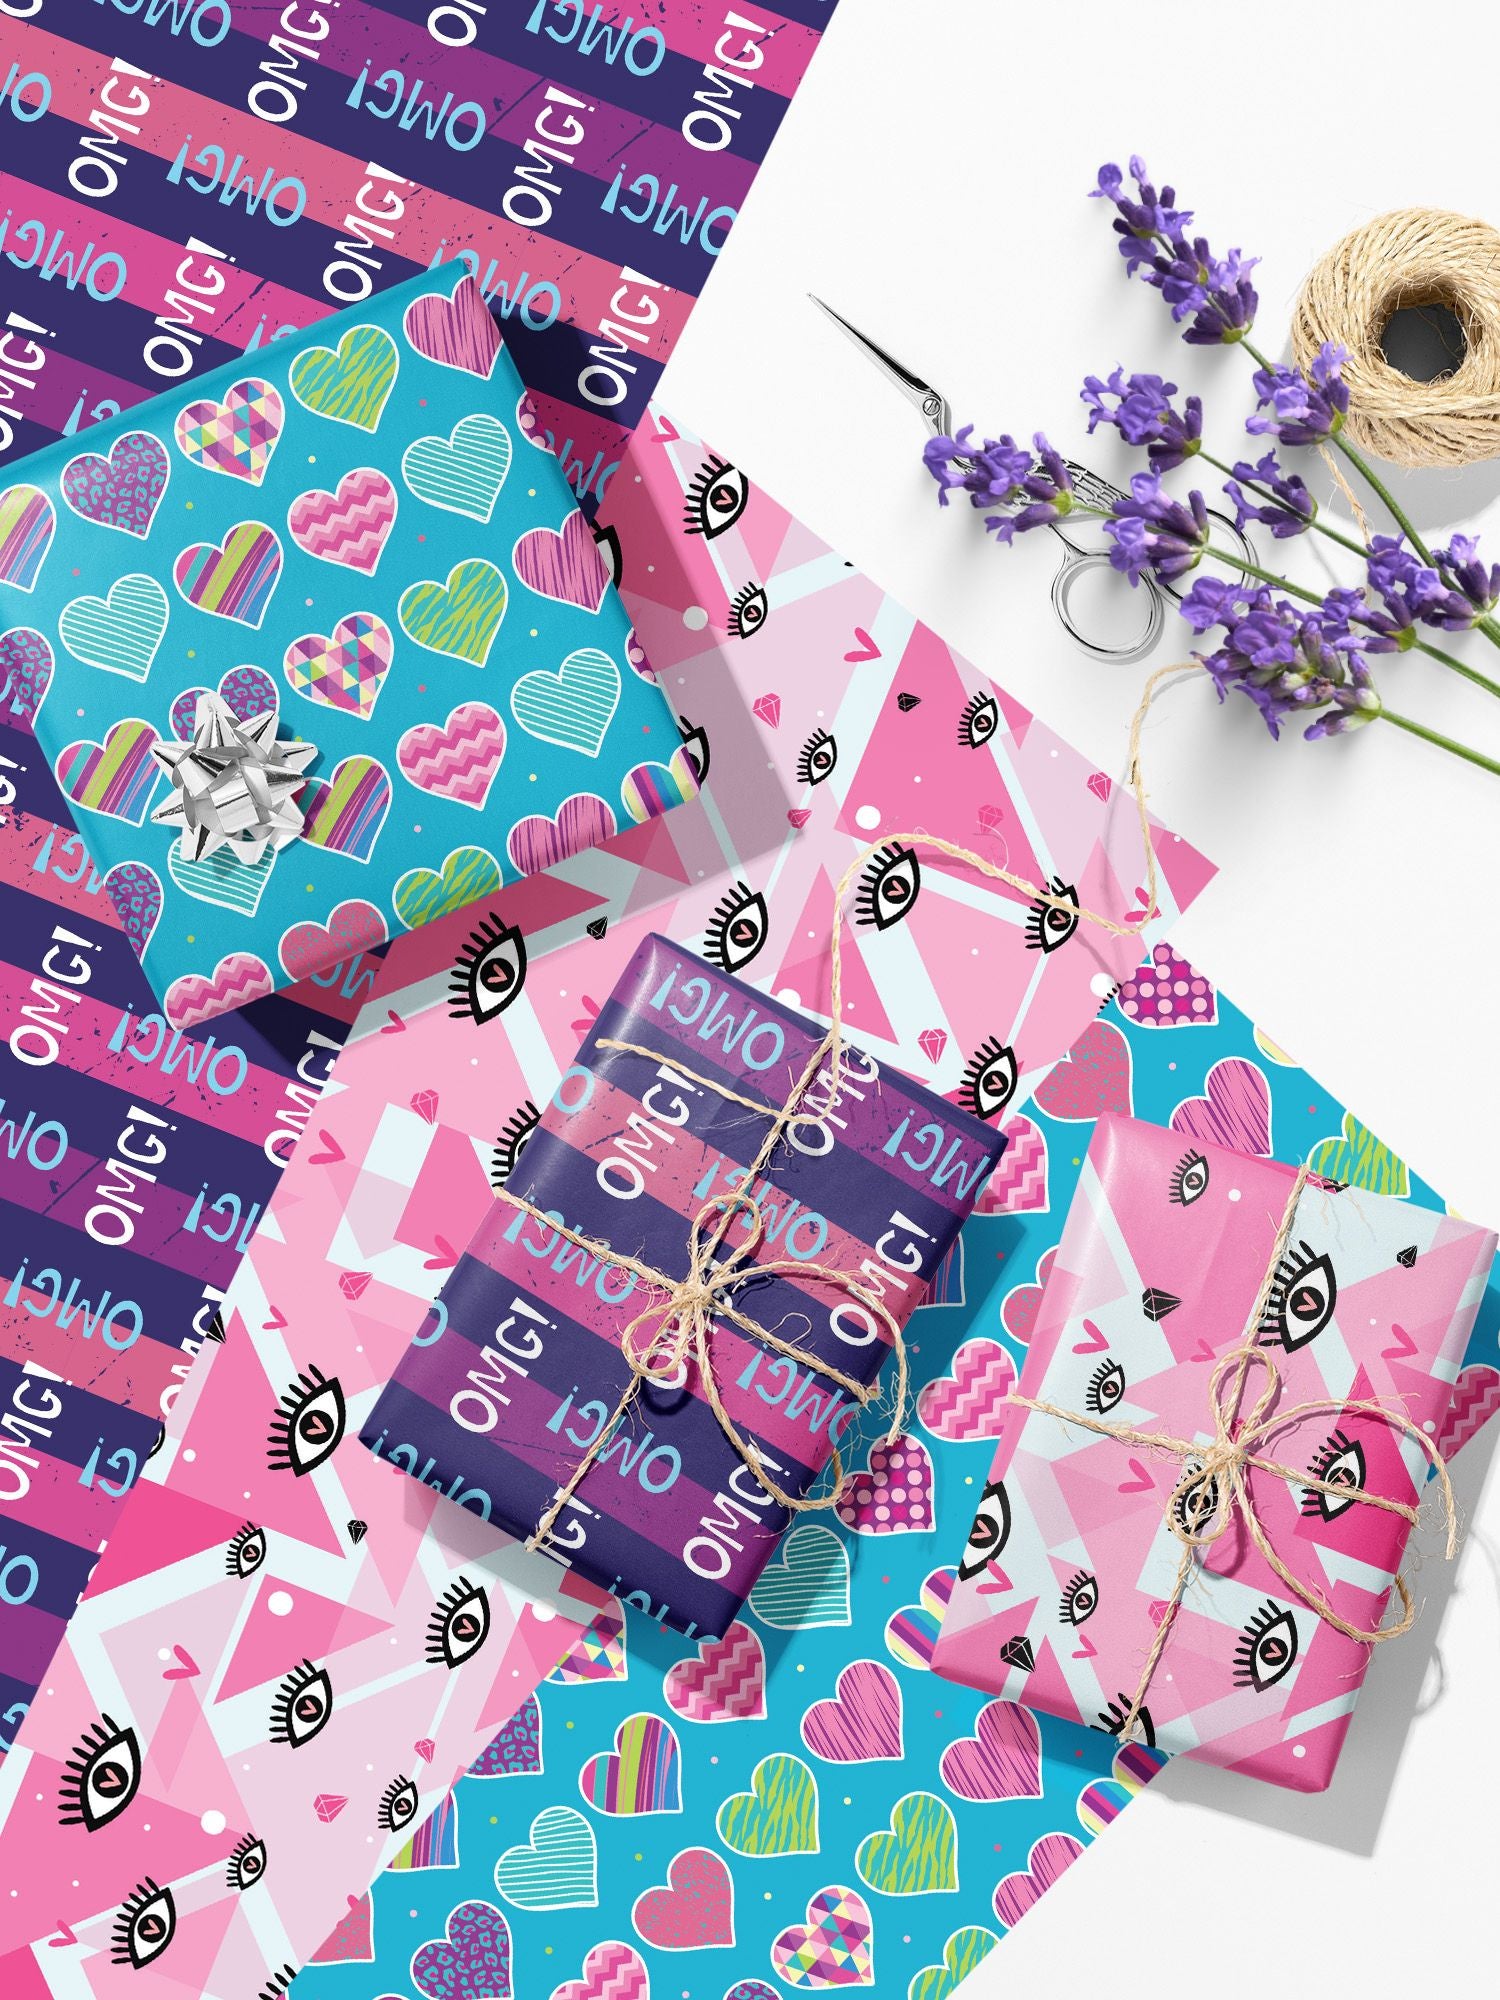 Premium Wrapping Paper for Gift Packing for all occasions - TeenTrend 5